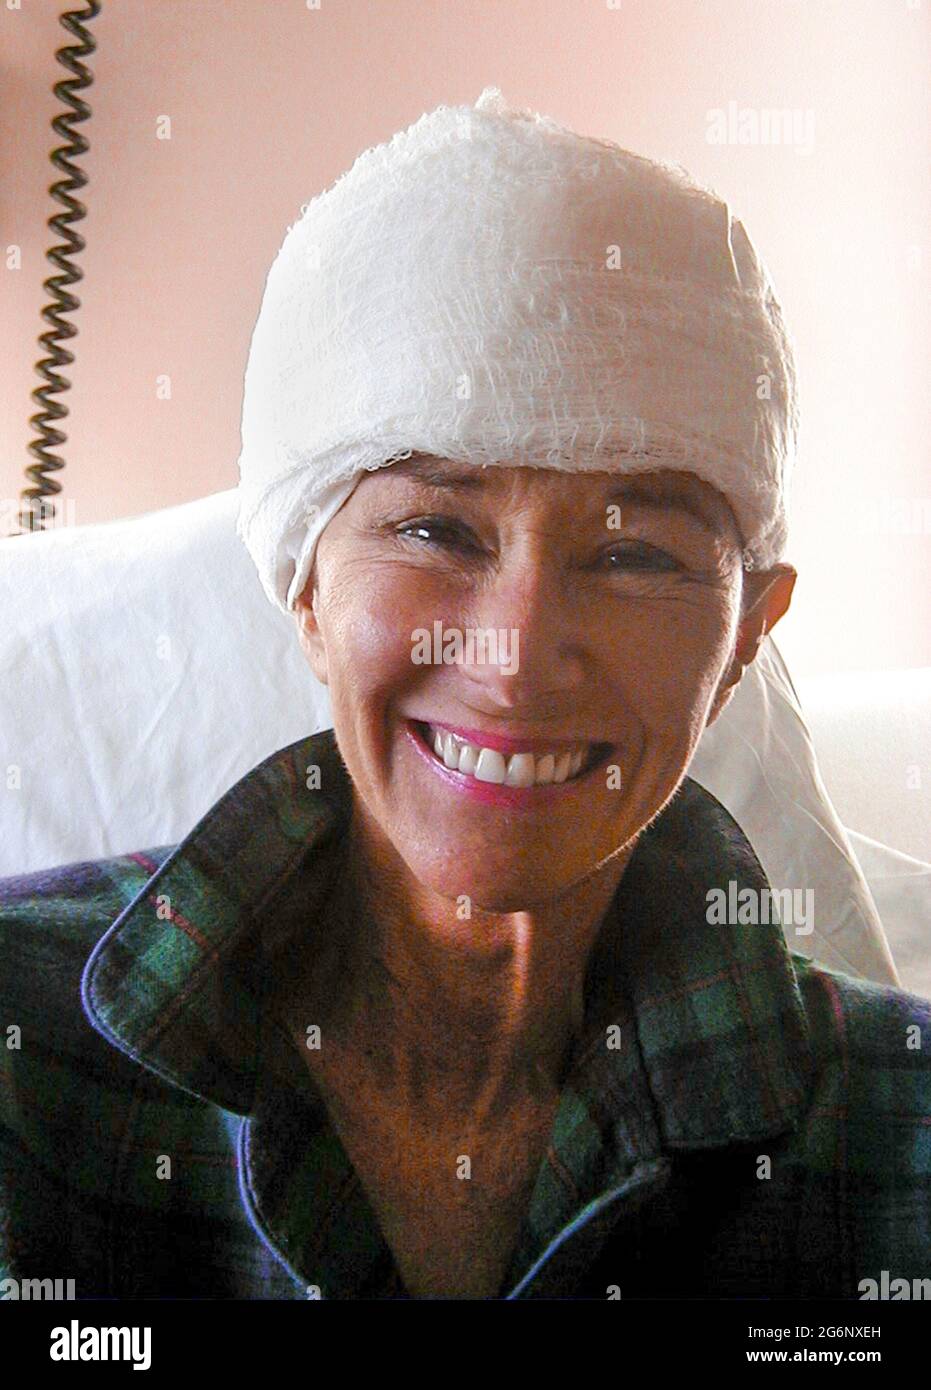 An American woman who suffered from epilepsy offers a happy smile beneath many layers of a gauze wrap that covers a large incision made in her head after an operation on her brain. Her hair was totally removed before the surgeon cut into her scalp and skull (cranium) to perform a temporal lobectomy, a surgery that can lower the number of seizures, make them less severe, or even stop them from happening. During this medical procedure, the doctor removed some of the temporal lobe of her brain where most seizures start. (3rd of 7 related images.) Model released. Stock Photo